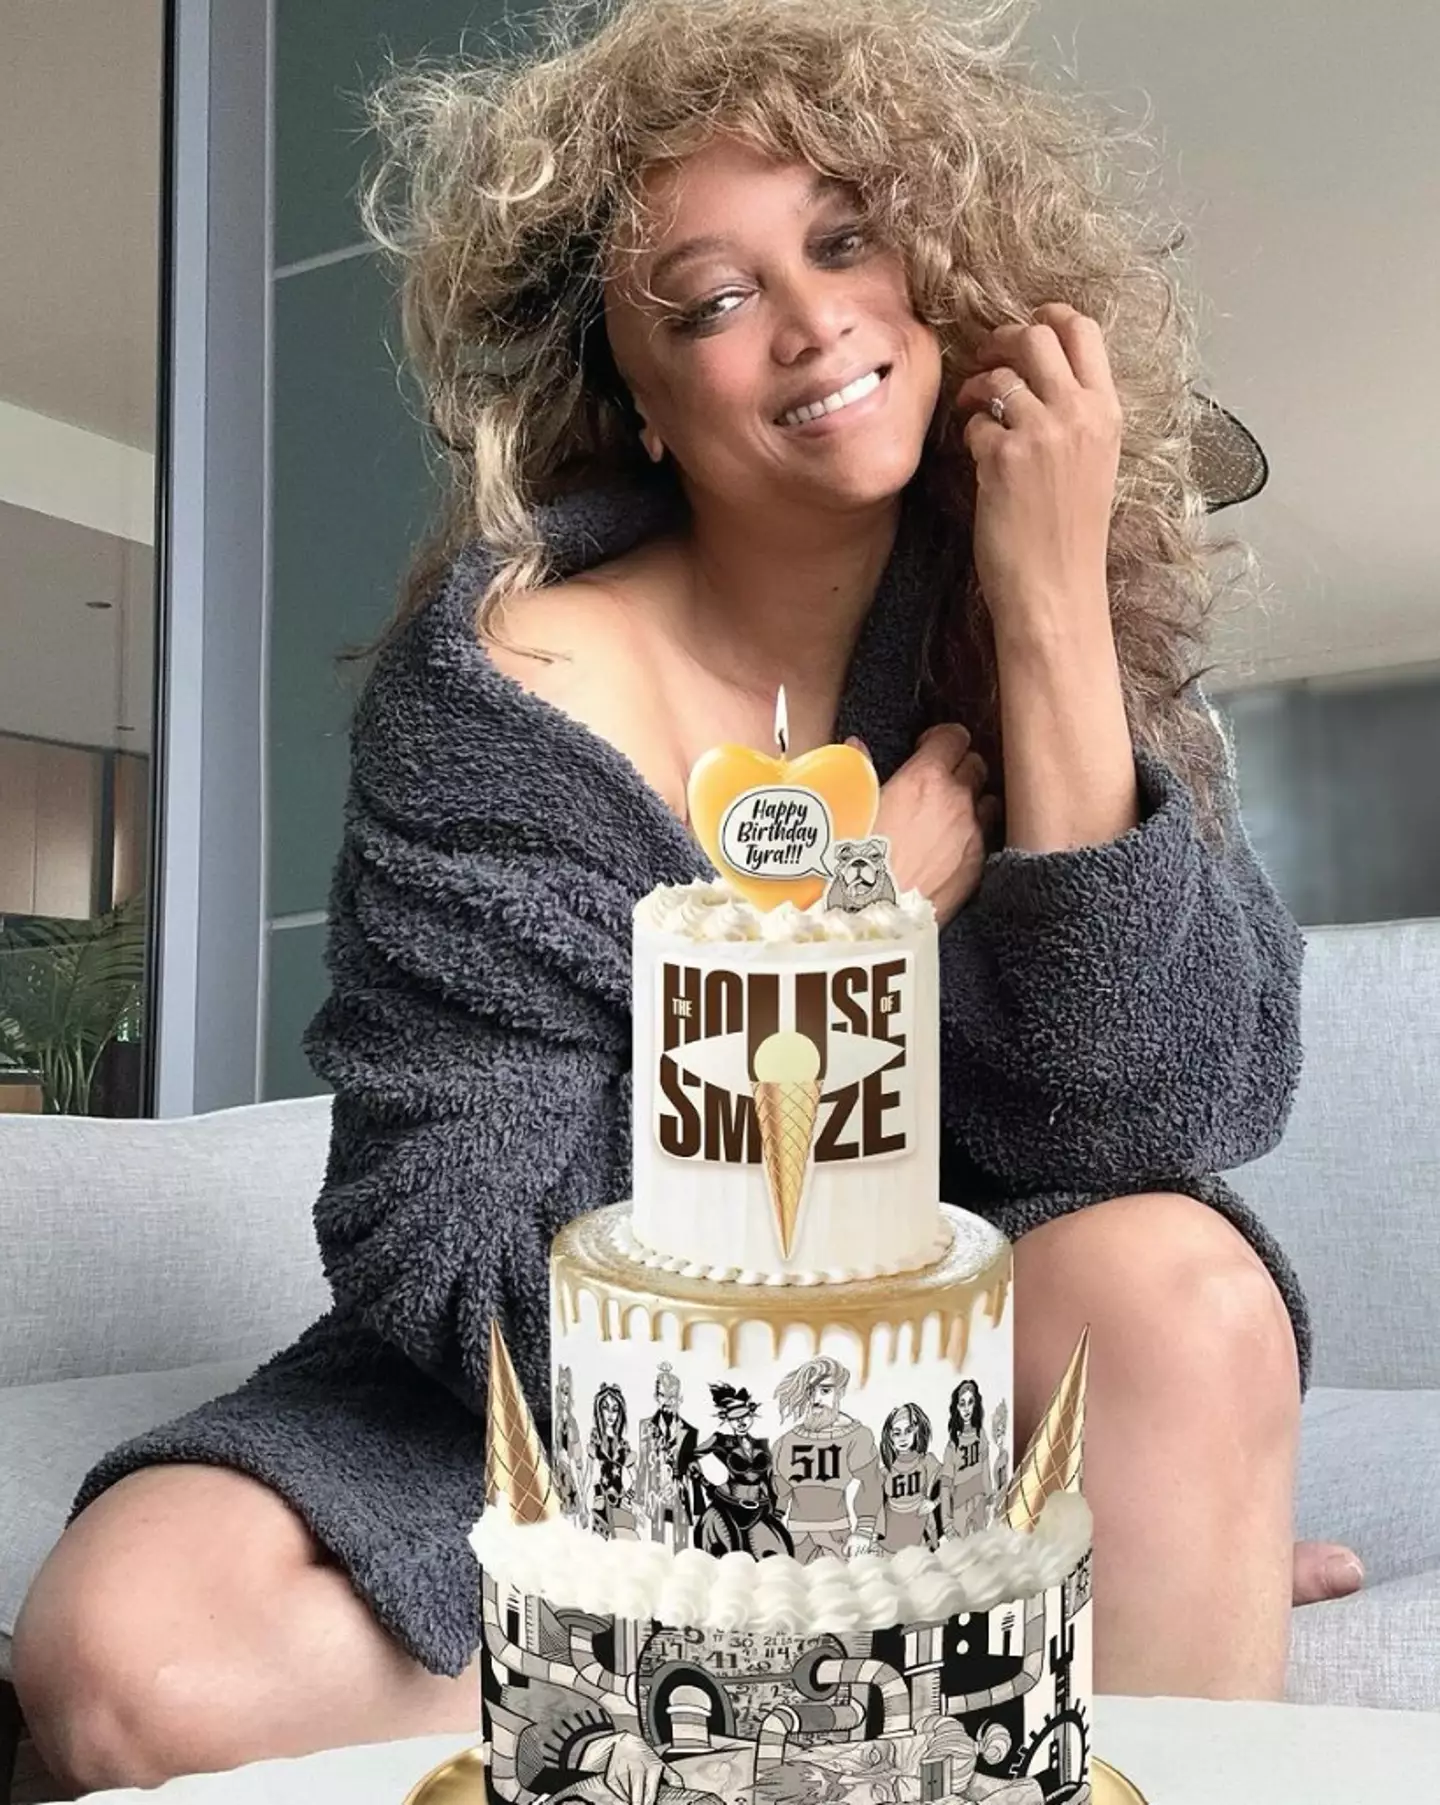 Banks said she had her first alcoholic drink when she turned 50 years old. (Instagram/@tyrabanks)